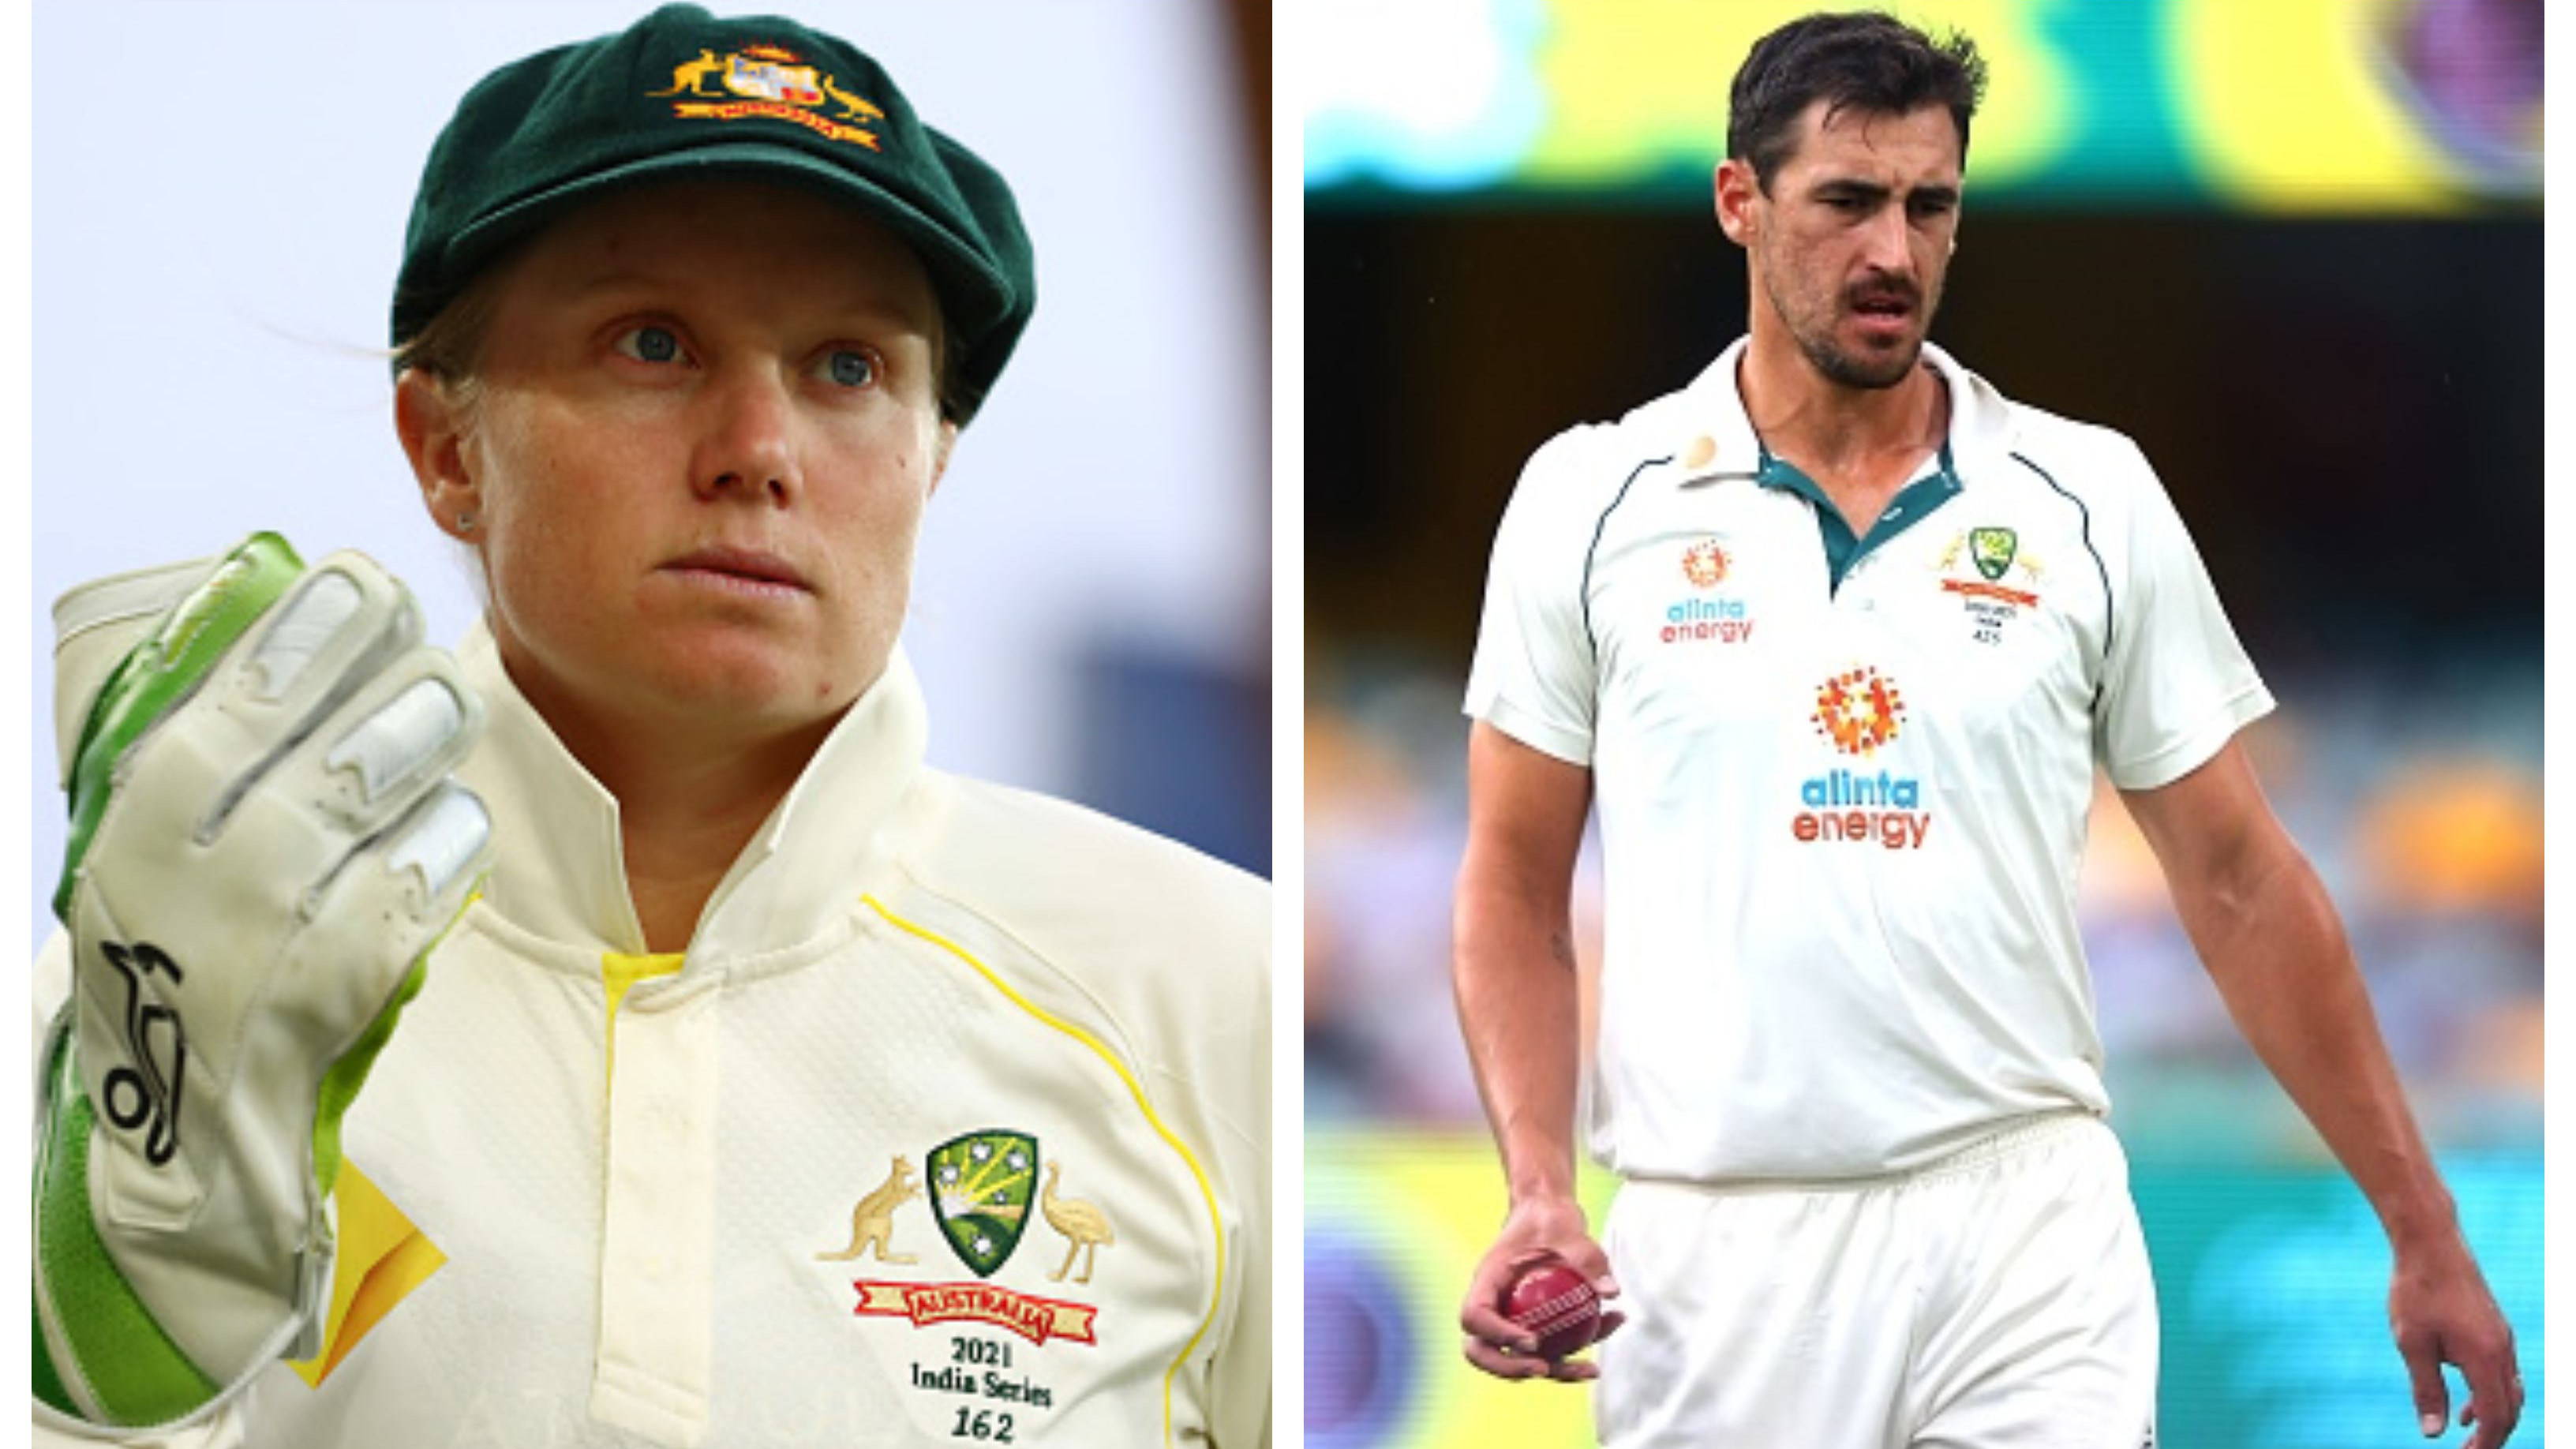 ‘Mitch didn’t want to be there playing cricket’, Alyssa Healy reveals why Starc wanted to skip India series last summer